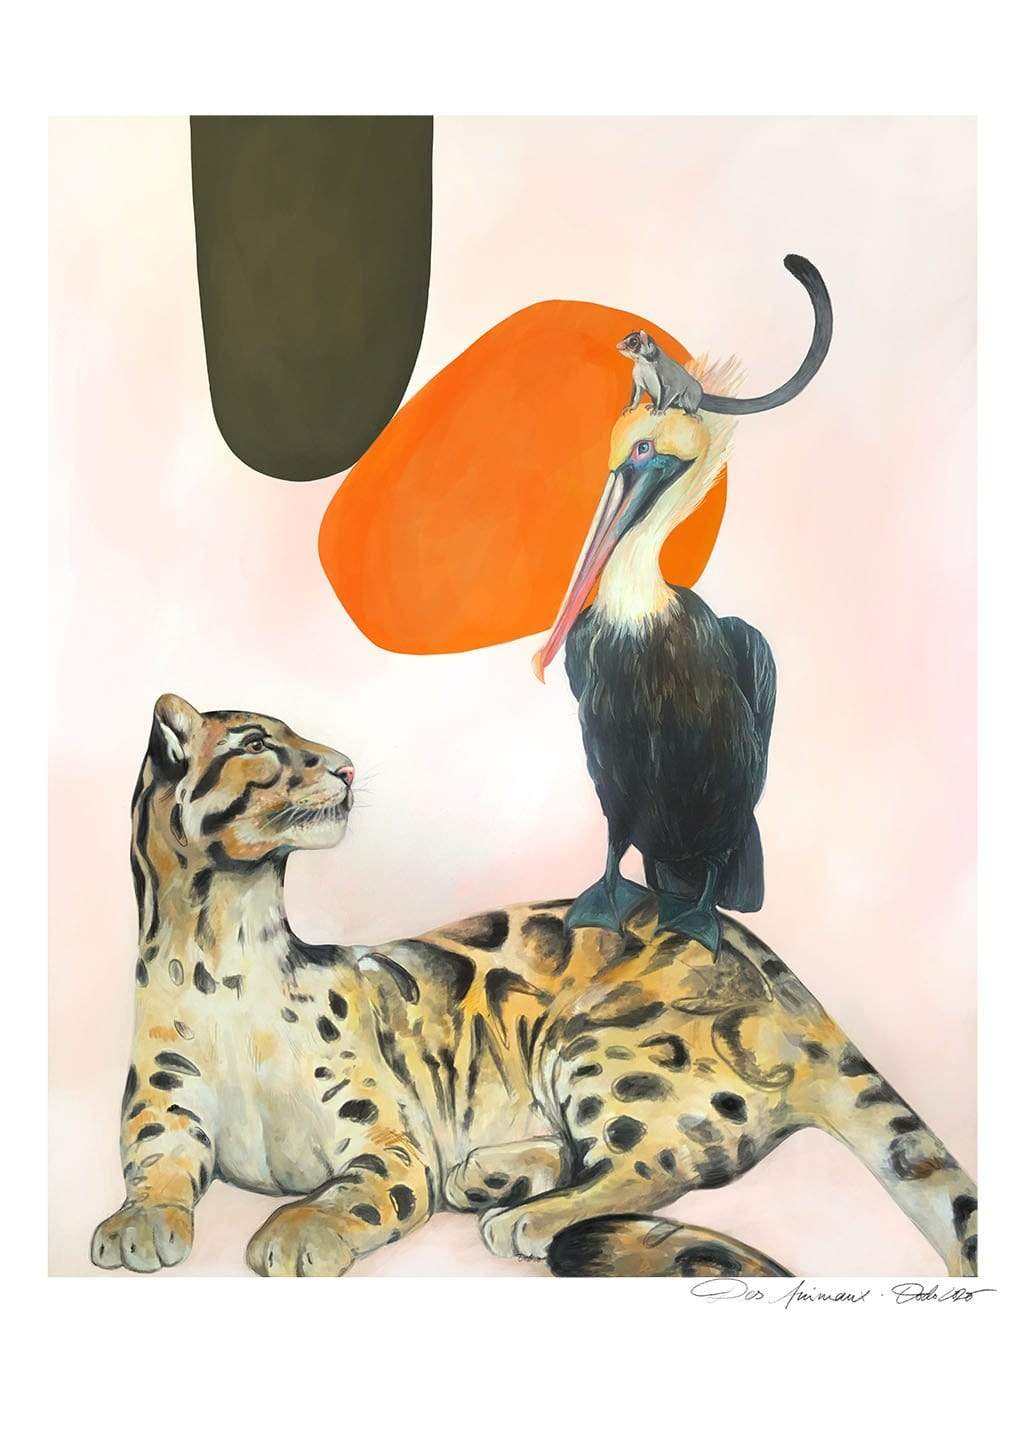 Artwork of a sugar glider sitting on a pelican who is standing on a cheetah.